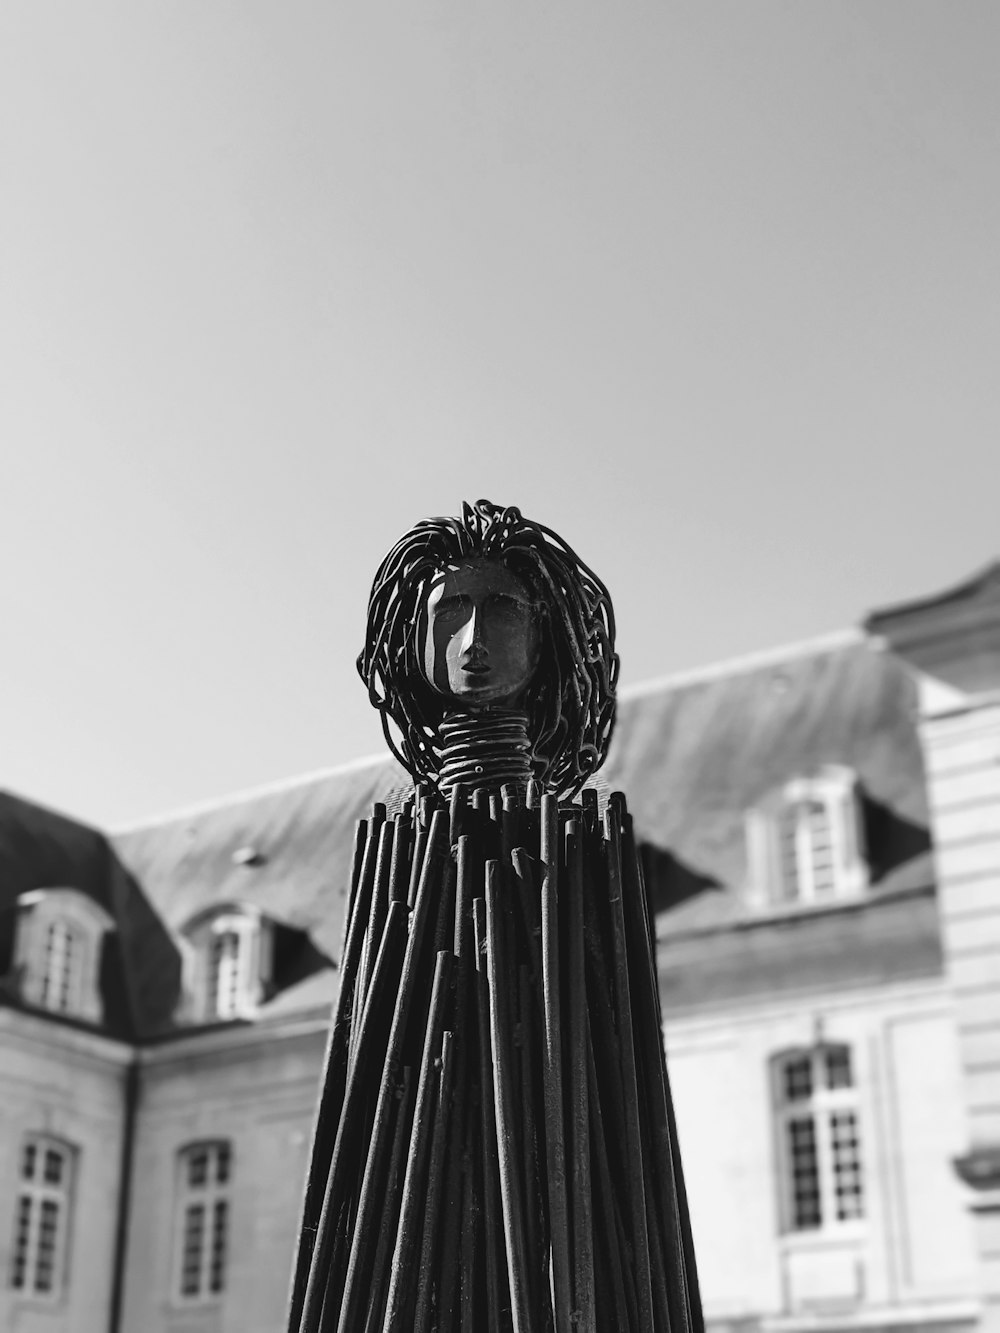 a black and white photo of a sculpture in front of a building